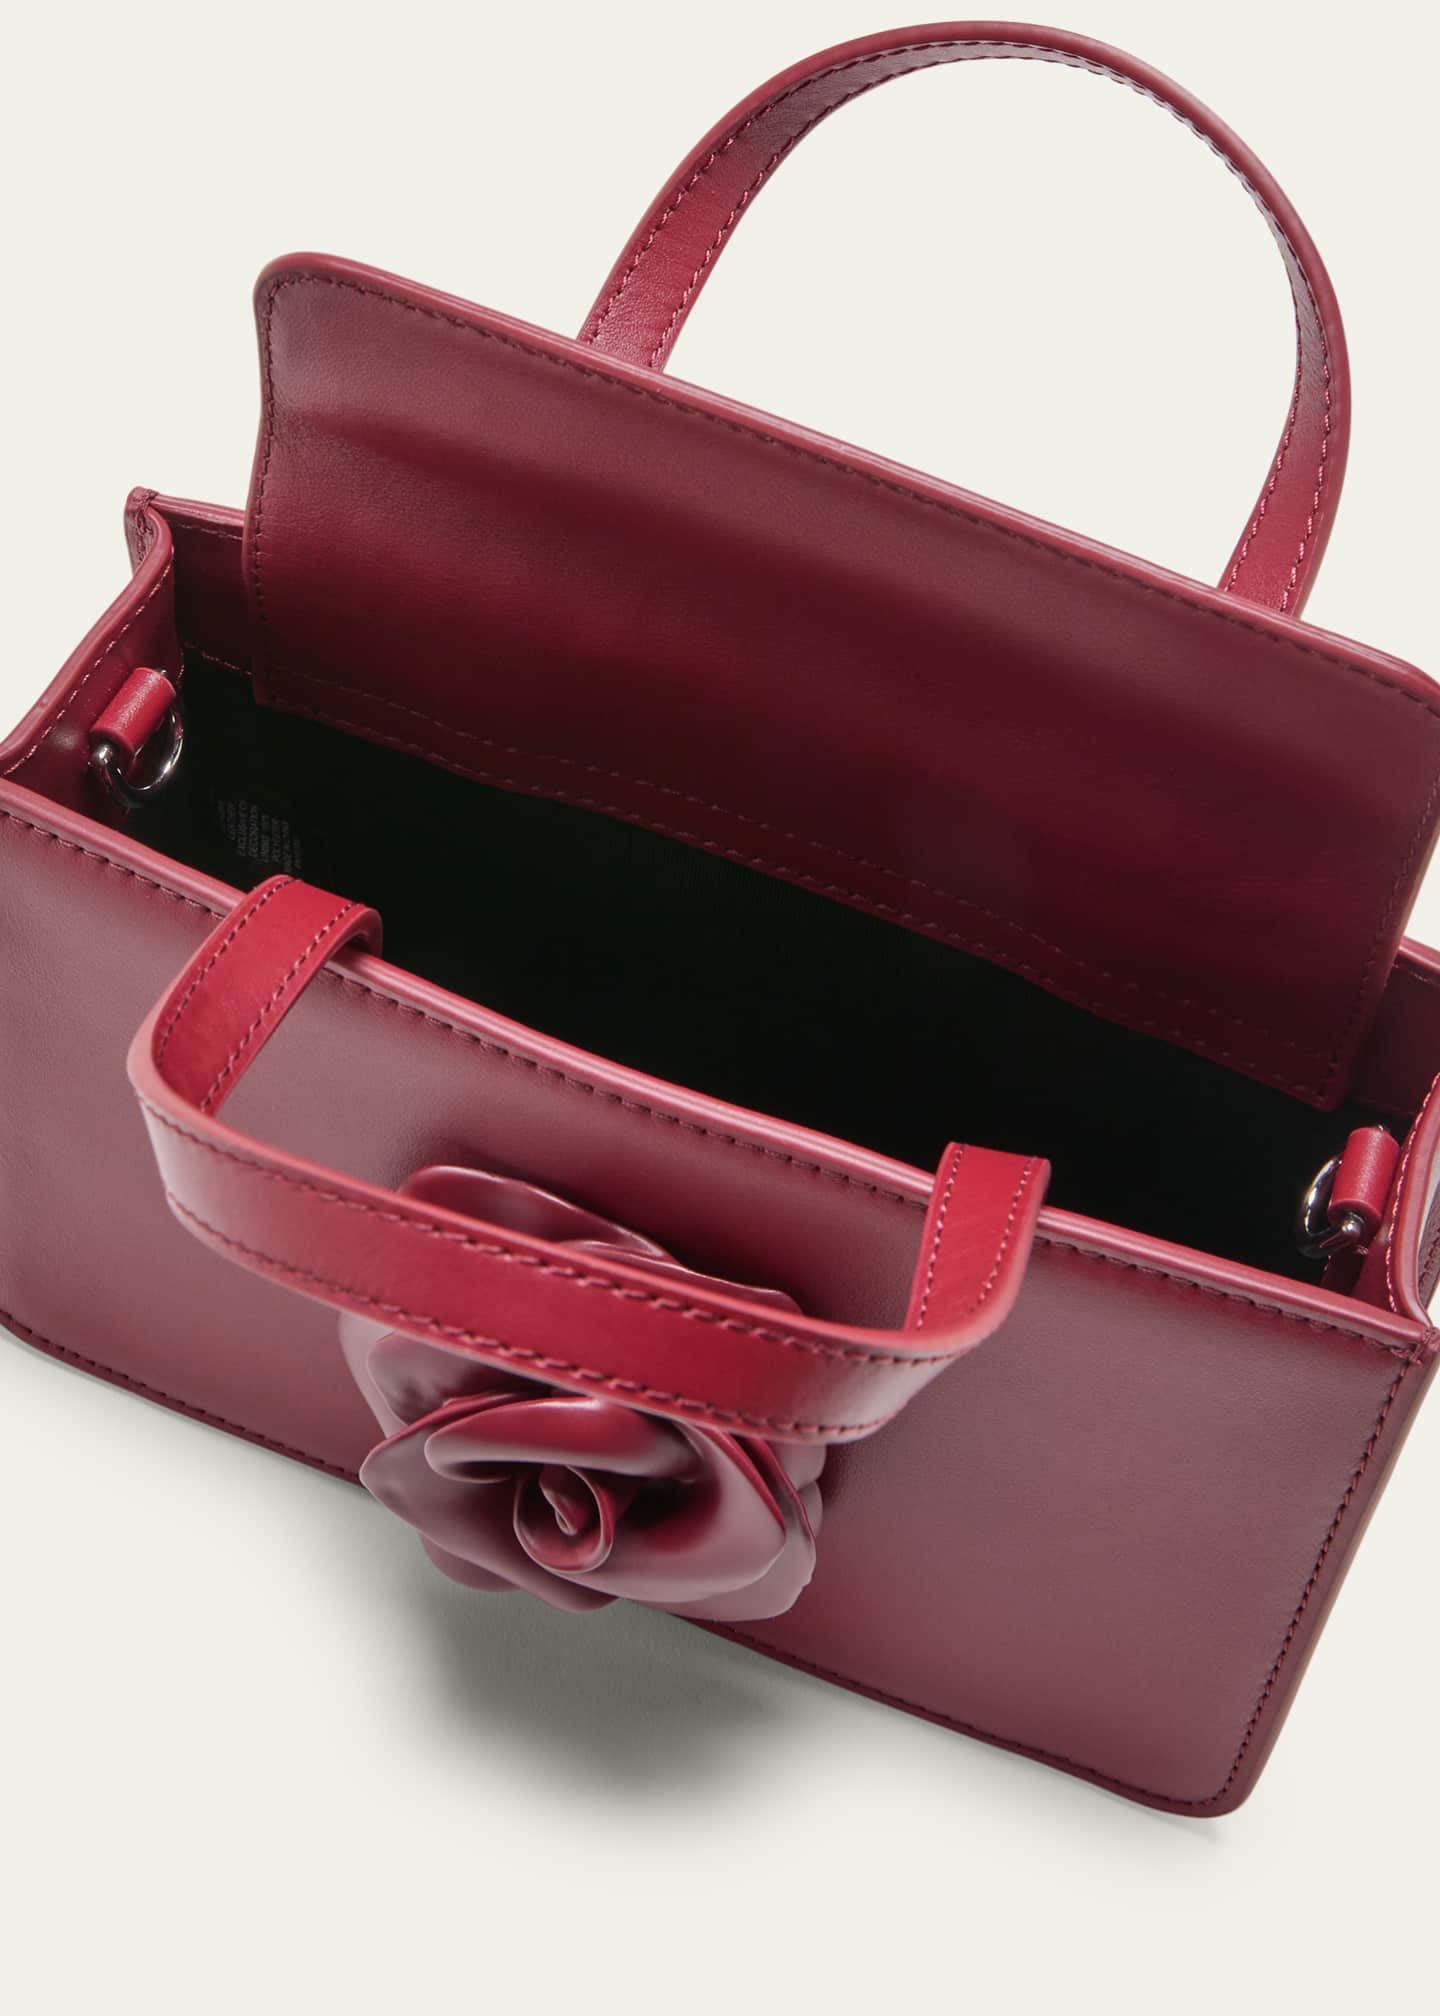 Patent leather handbag Puppets and Puppets Pink in Patent leather